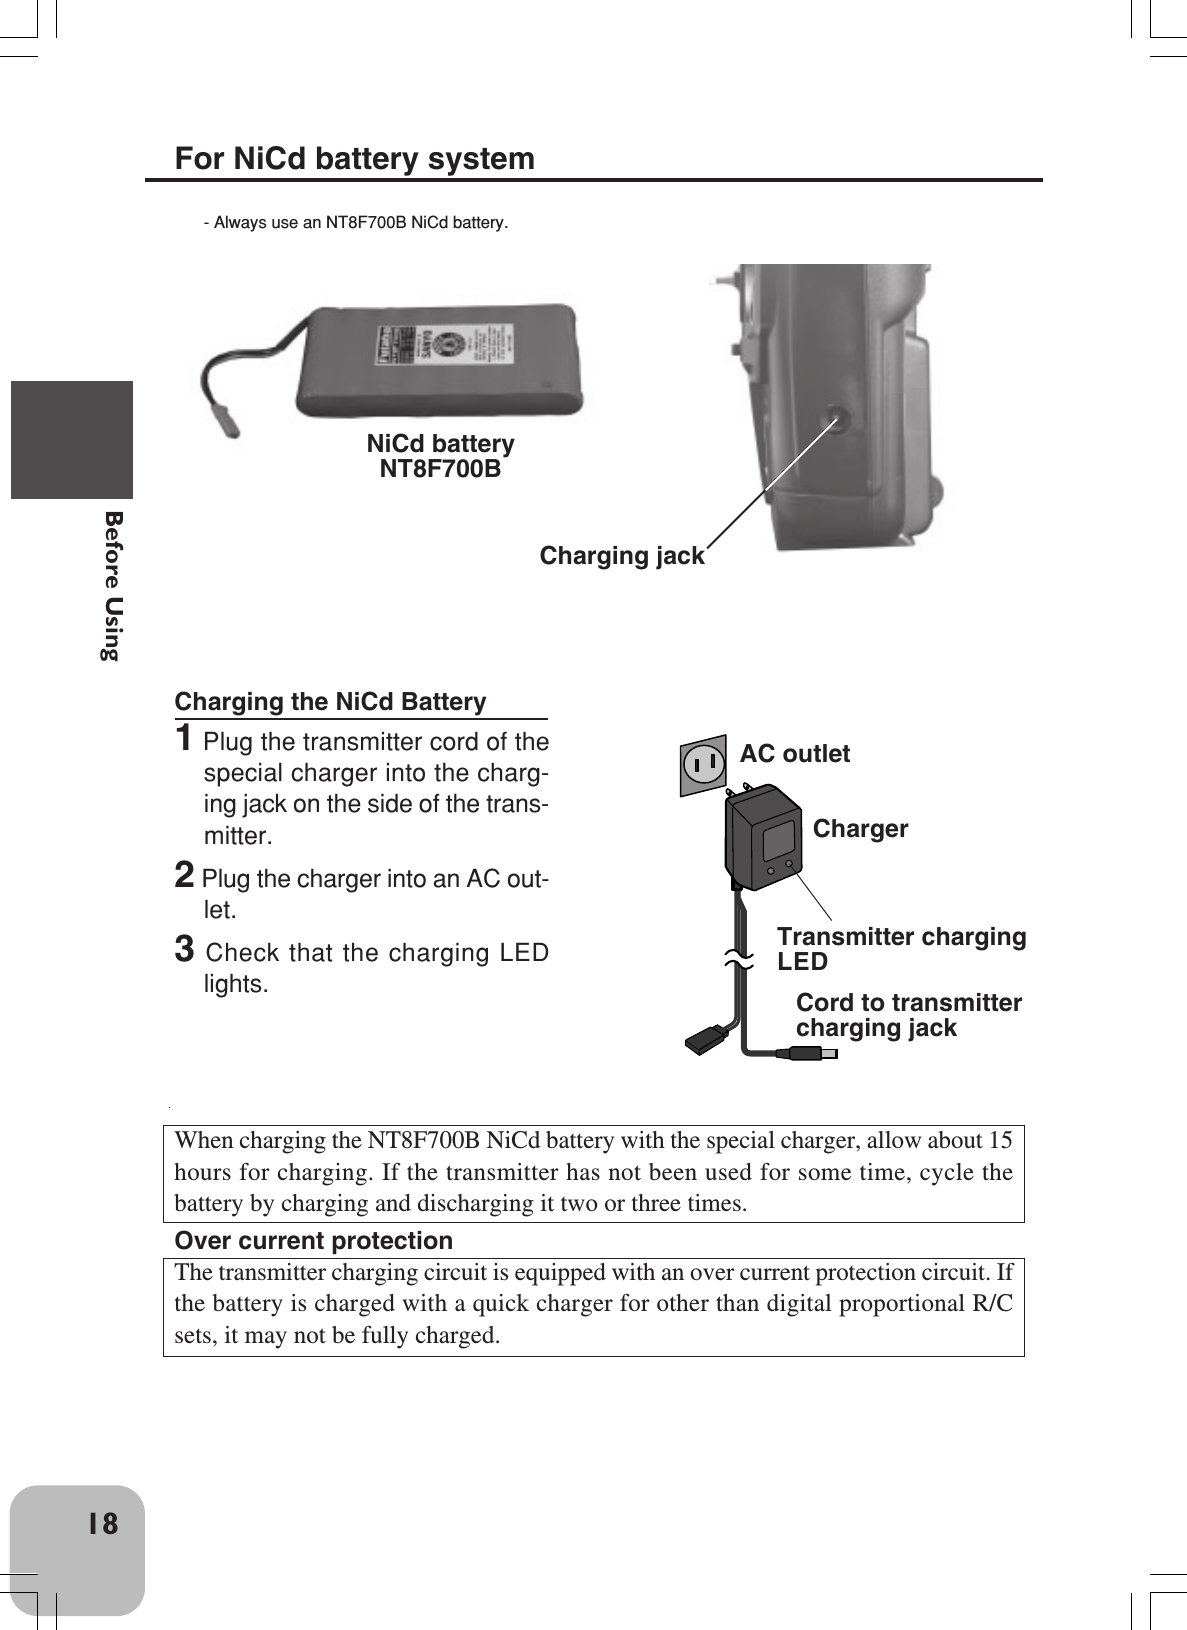 18Before UsingFor NiCd battery system- Always use an NT8F700B NiCd battery.NiCd batteryNT8F700BCharging the NiCd Battery1 Plug the transmitter cord of thespecial charger into the charg-ing jack on the side of the trans-mitter.2 Plug the charger into an AC out-let.3 Check that the charging LEDlights.ChargerTransmitter chargingLEDCord to transmittercharging jackWhen charging the NT8F700B NiCd battery with the special charger, allow about 15hours for charging. If the transmitter has not been used for some time, cycle thebattery by charging and discharging it two or three times.Over current protectionThe transmitter charging circuit is equipped with an over current protection circuit. Ifthe battery is charged with a quick charger for other than digital proportional R/Csets, it may not be fully charged.AC outletCharging jack